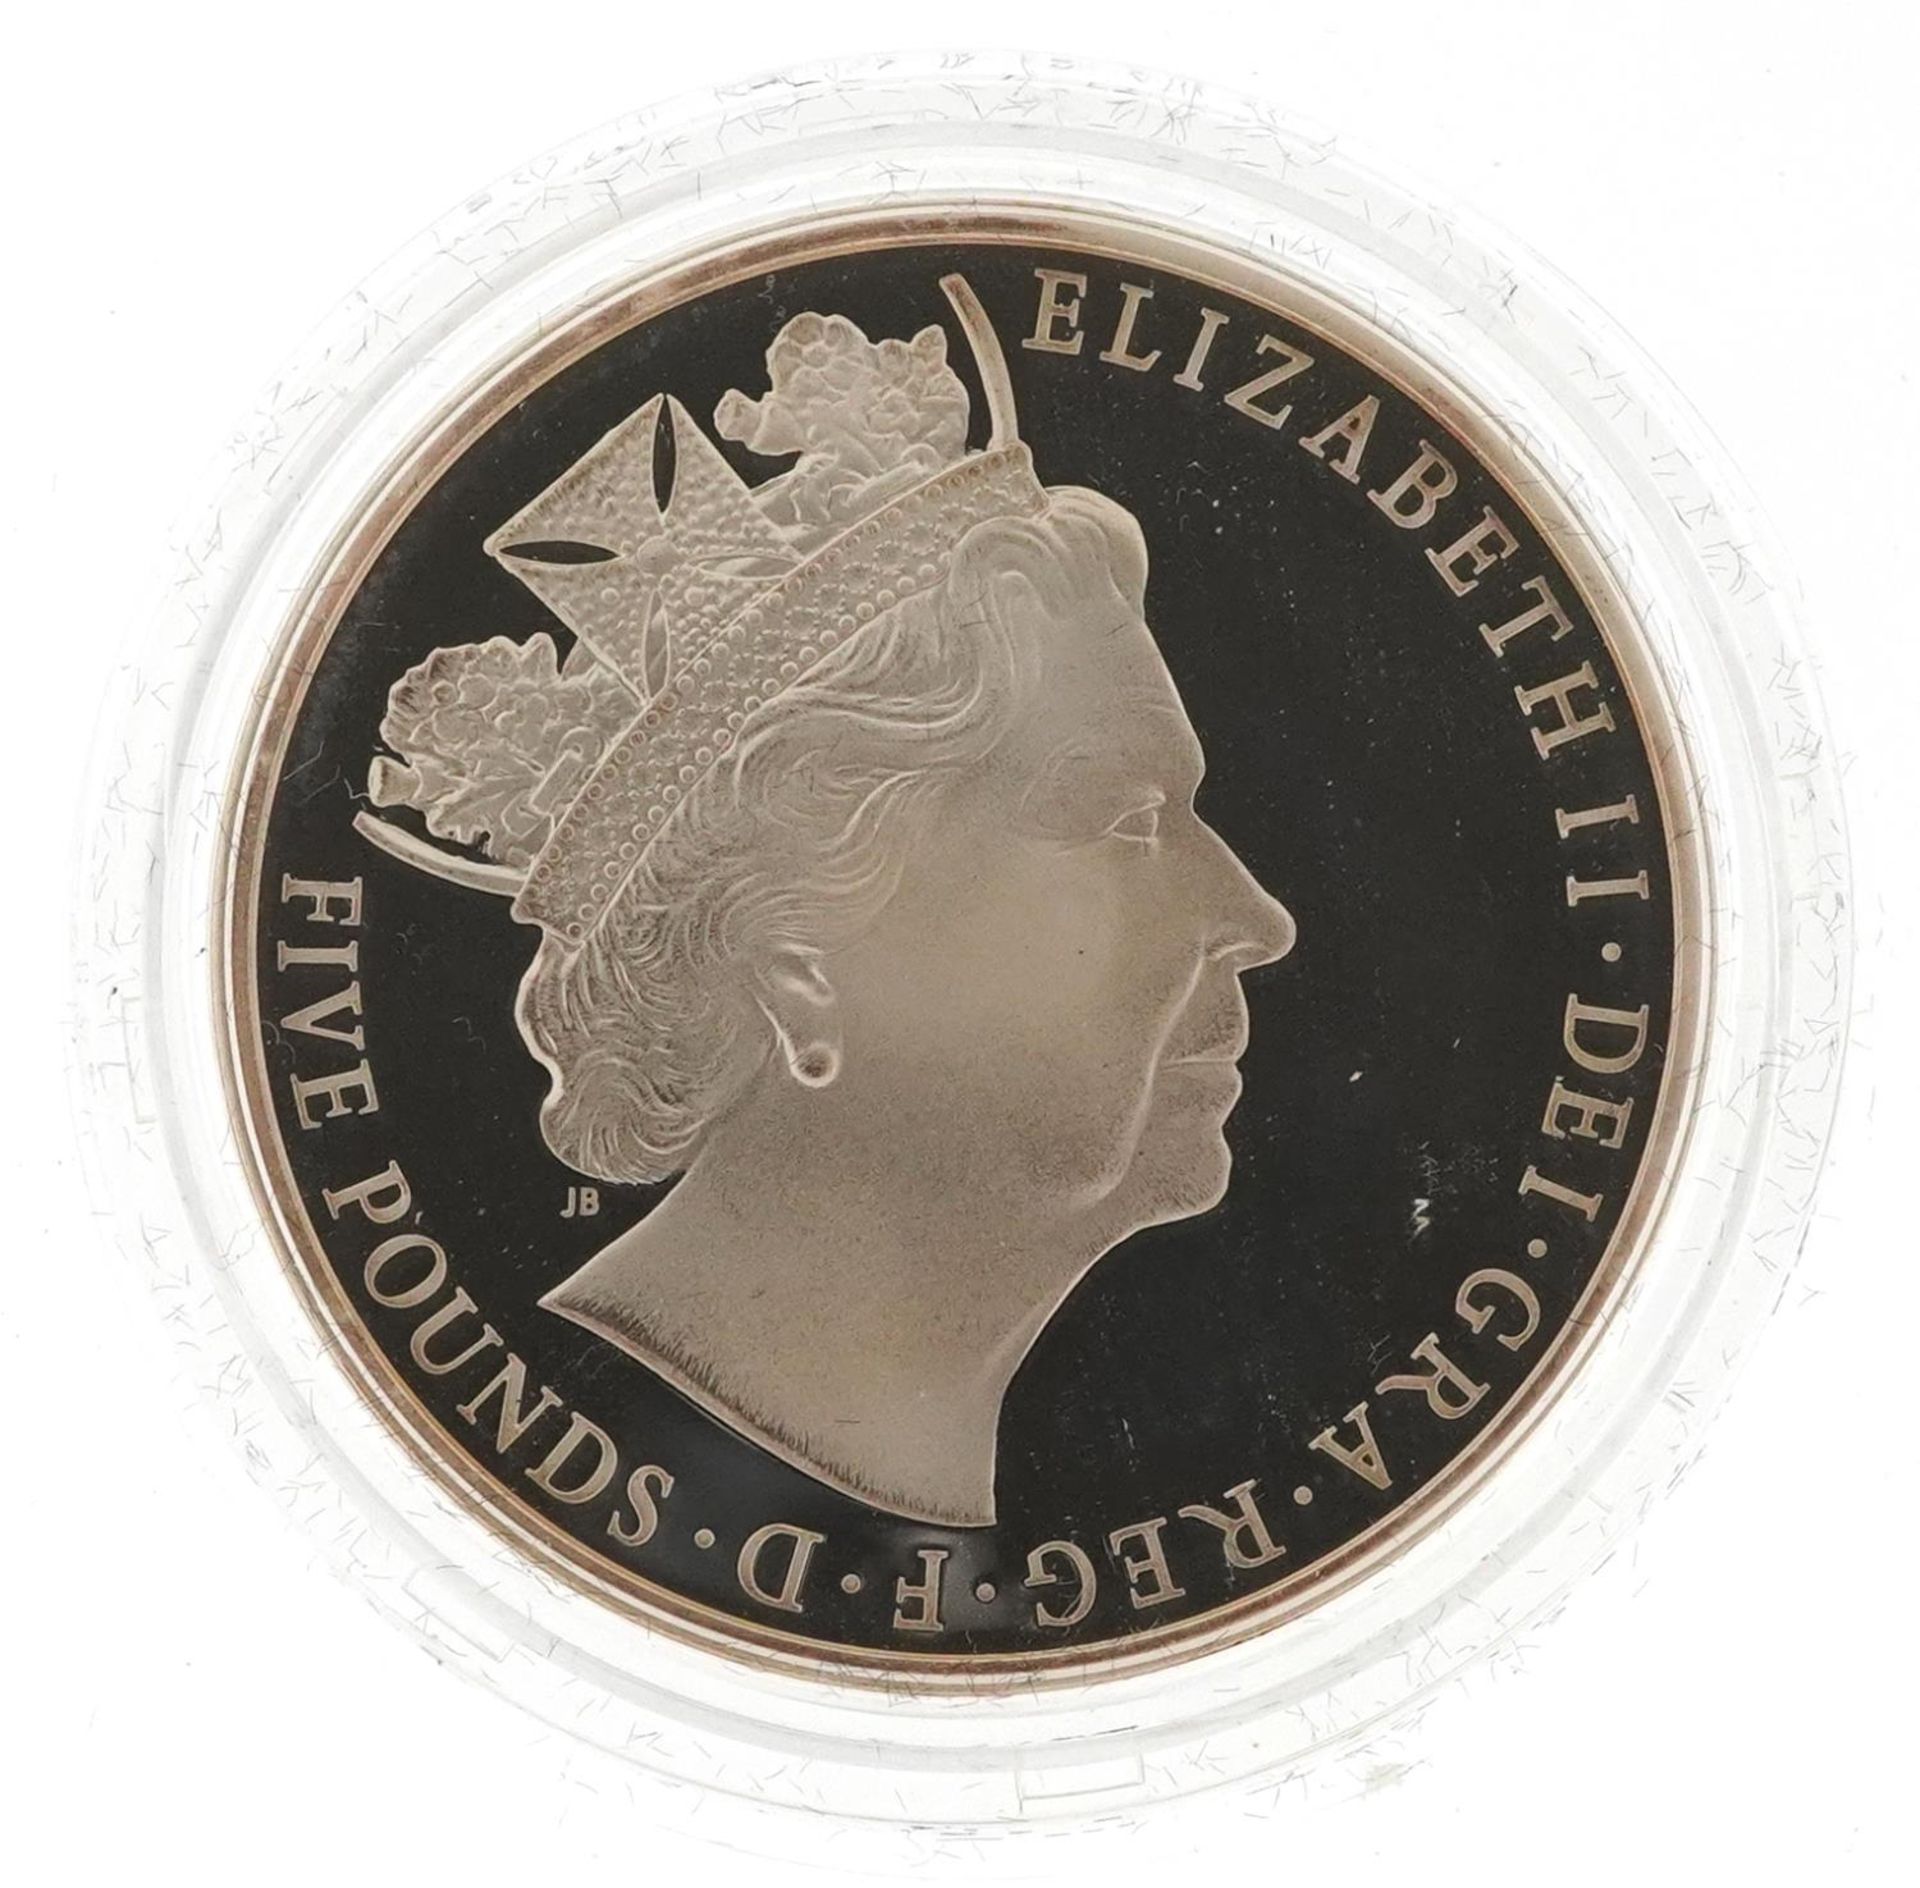 Elizabeth II 2015 United Kingdom five pound silver proof coin by The Royal Mint commemorating The - Bild 3 aus 4